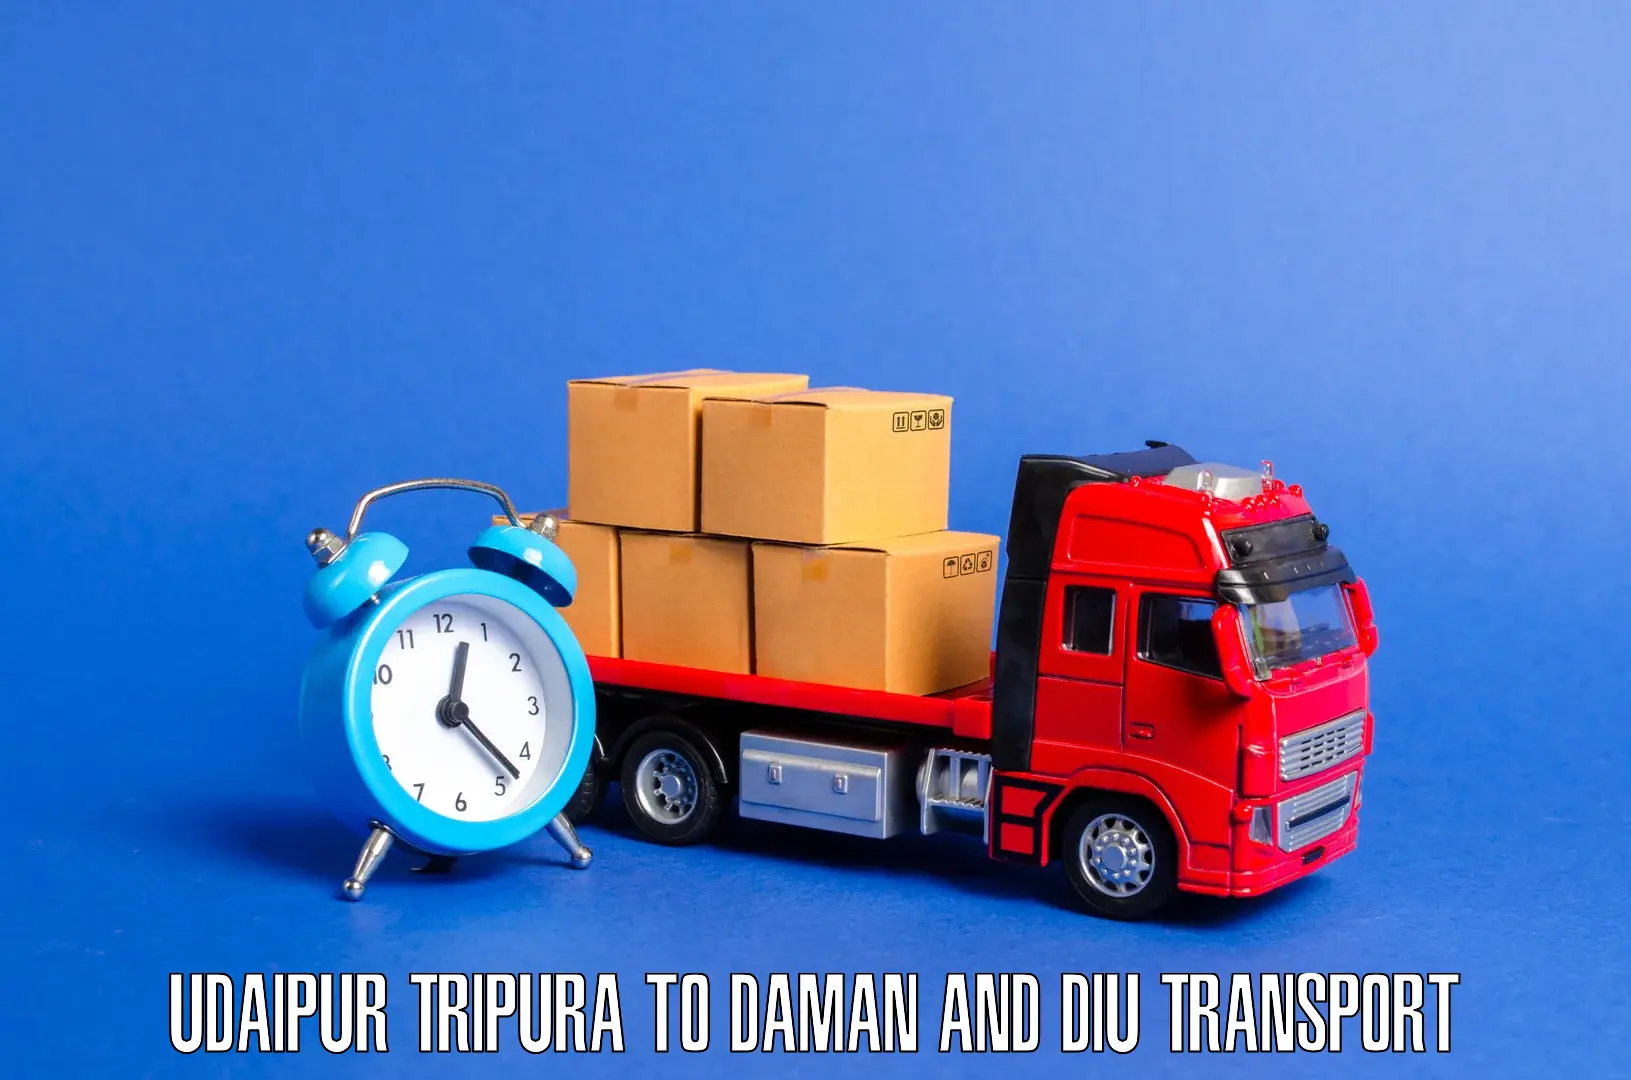 Vehicle transport services Udaipur Tripura to Daman and Diu